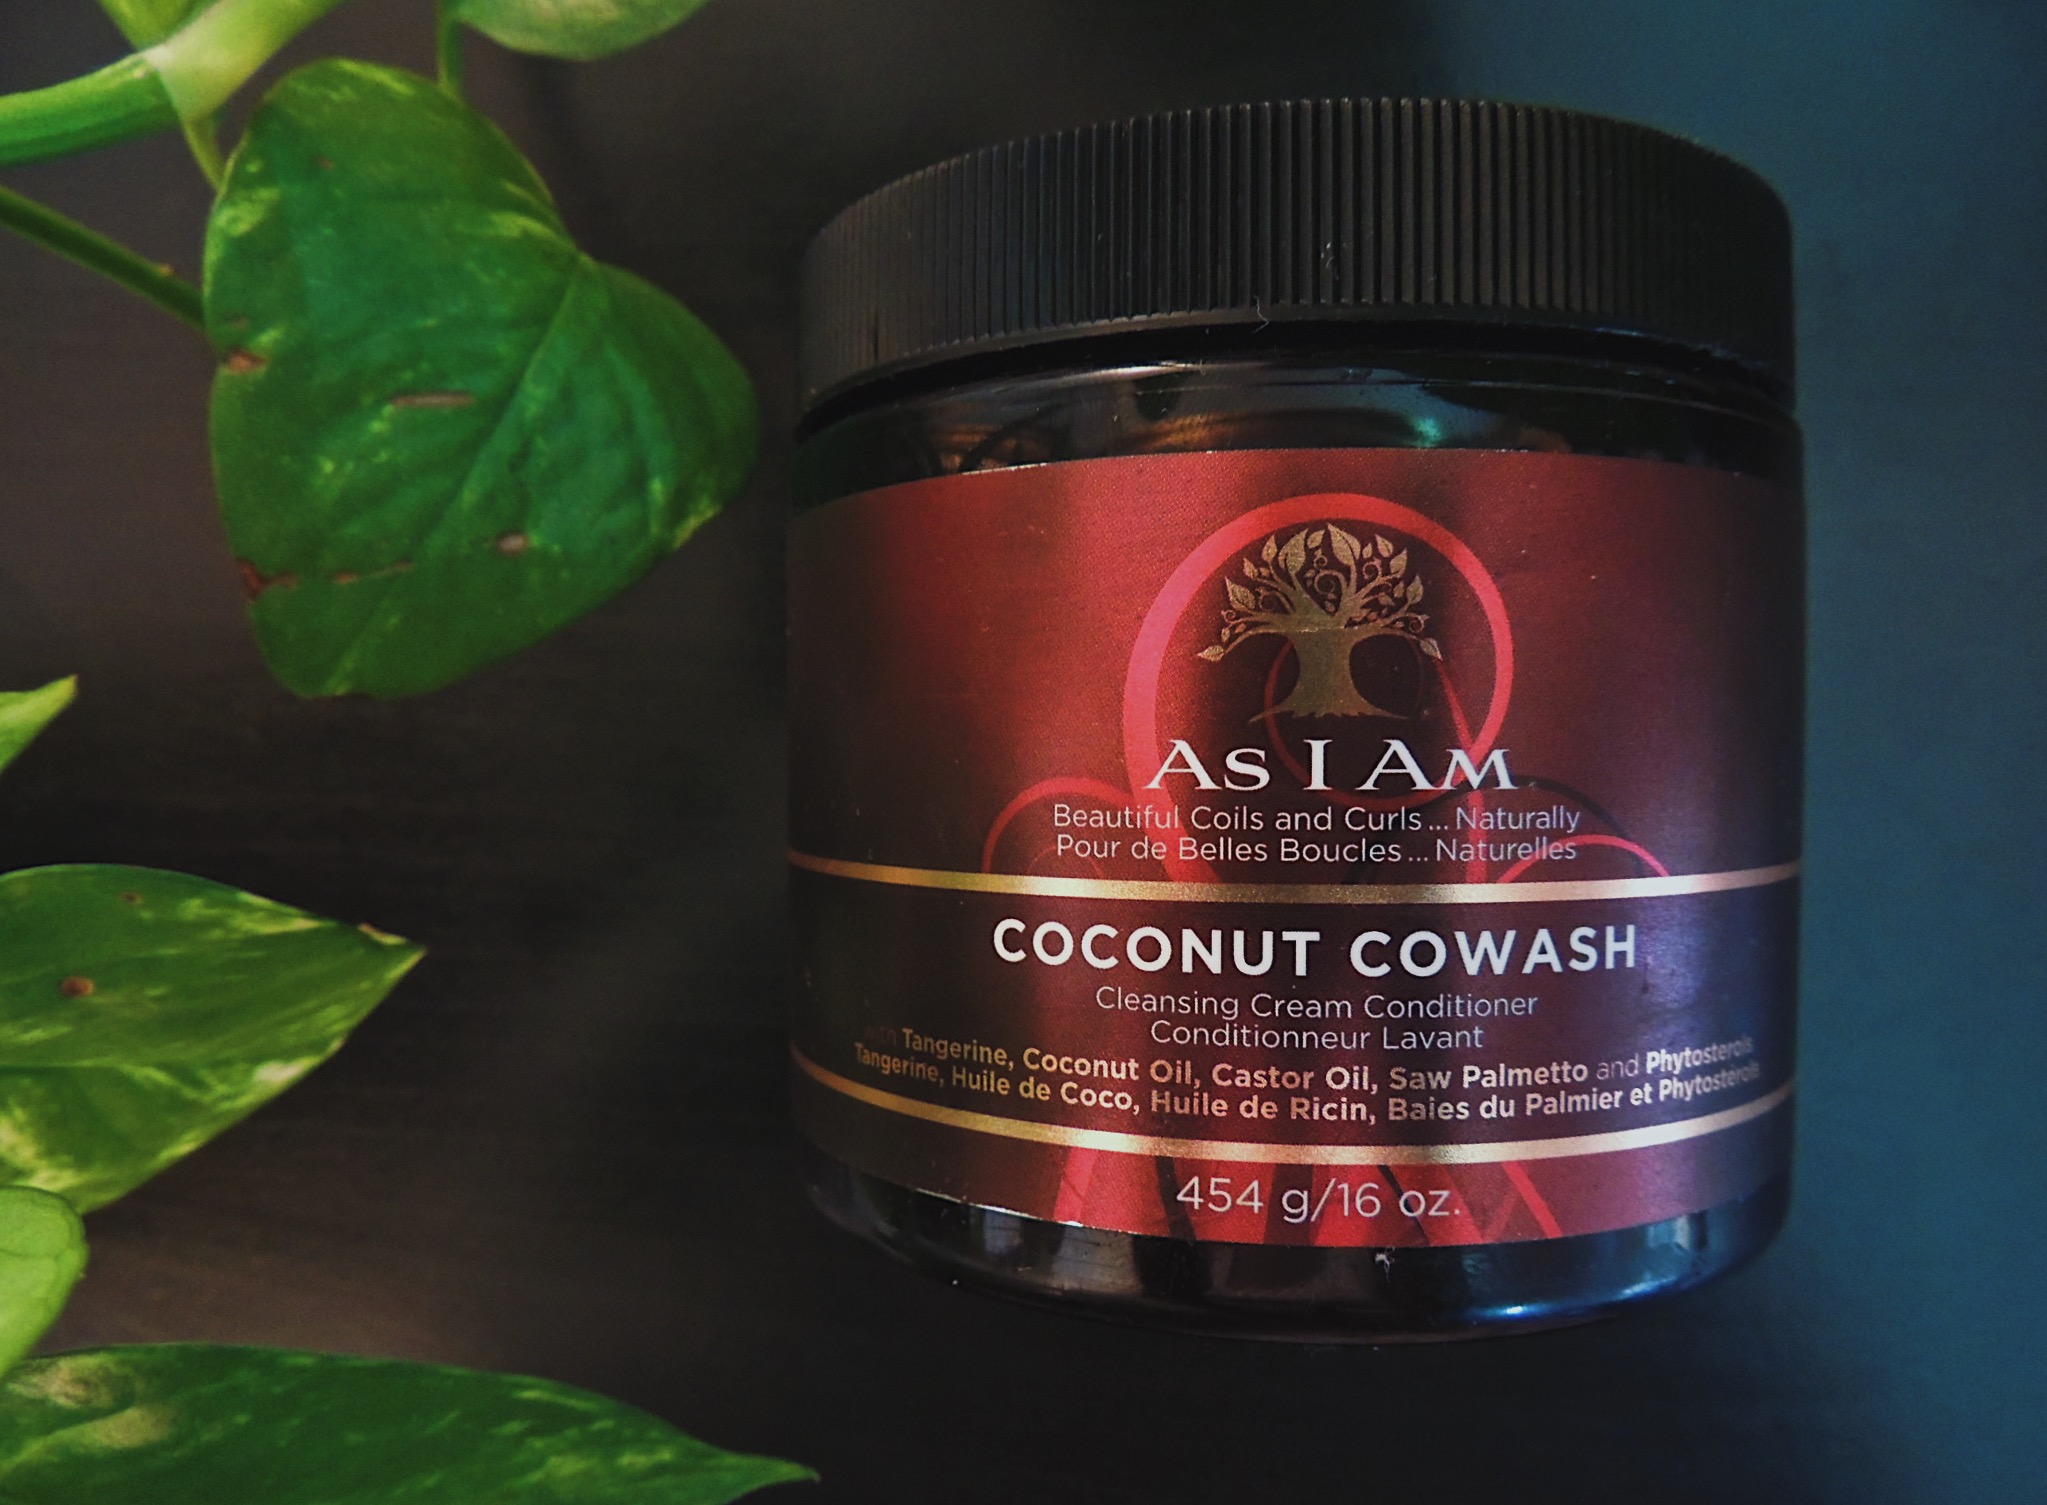 LCM-photography-natural hair products-as-i-am-coconut-cowash